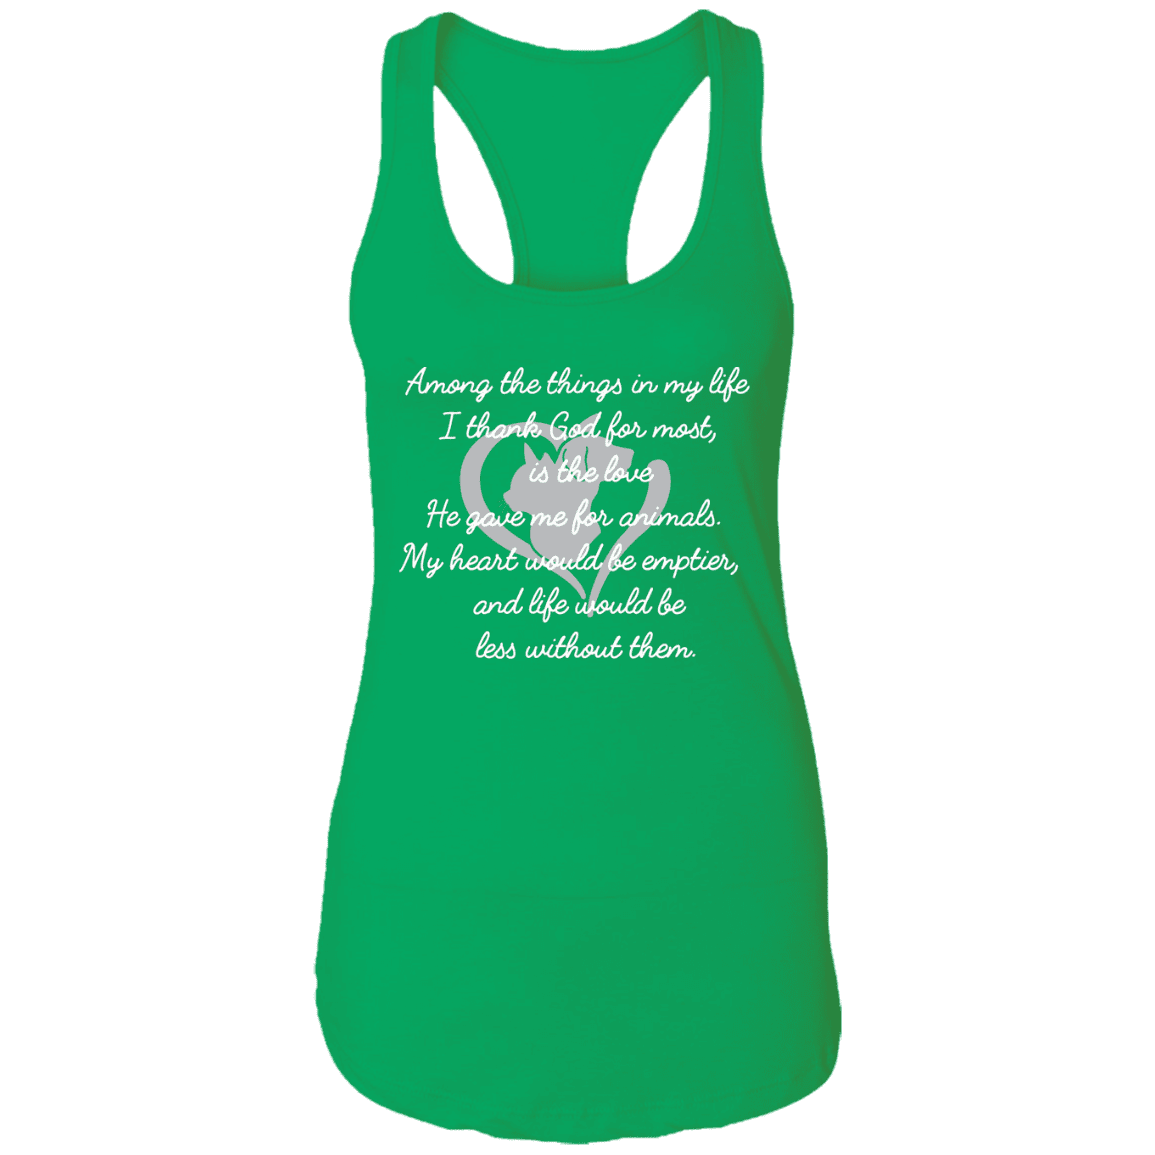 Among The Things In Life God - Ladies Racer Back Tank.